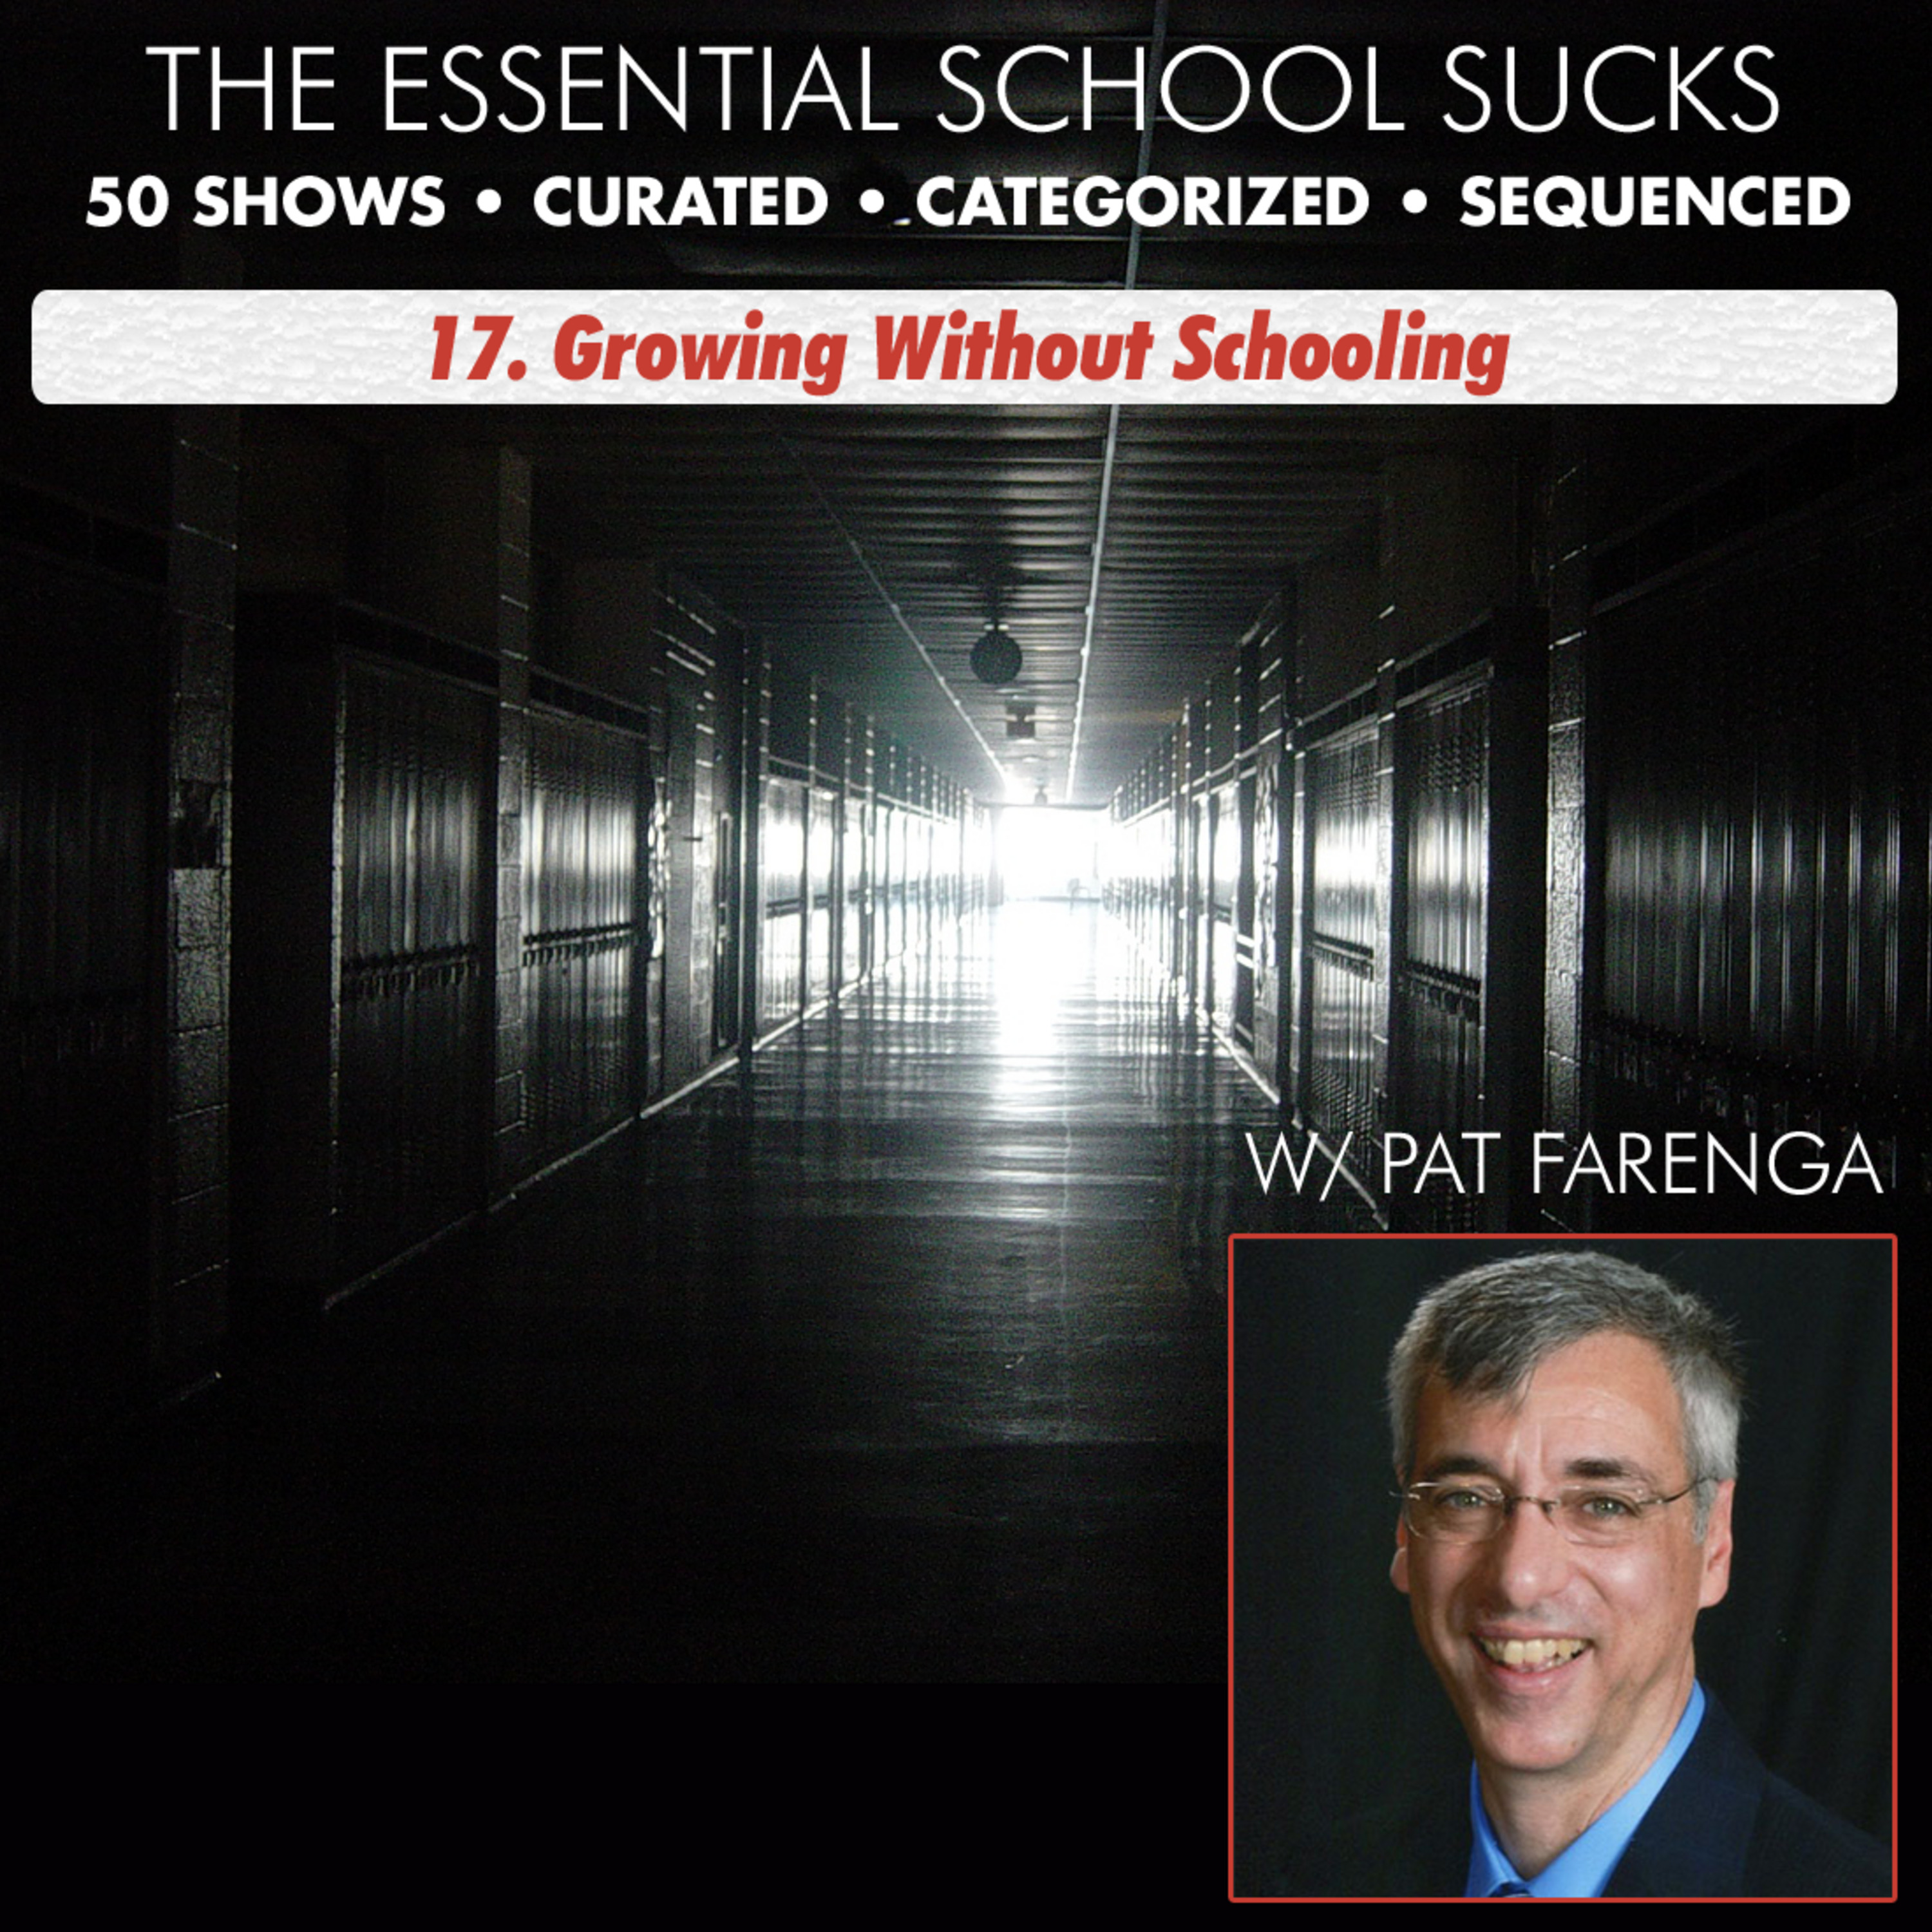 17. Growing Without Schooling